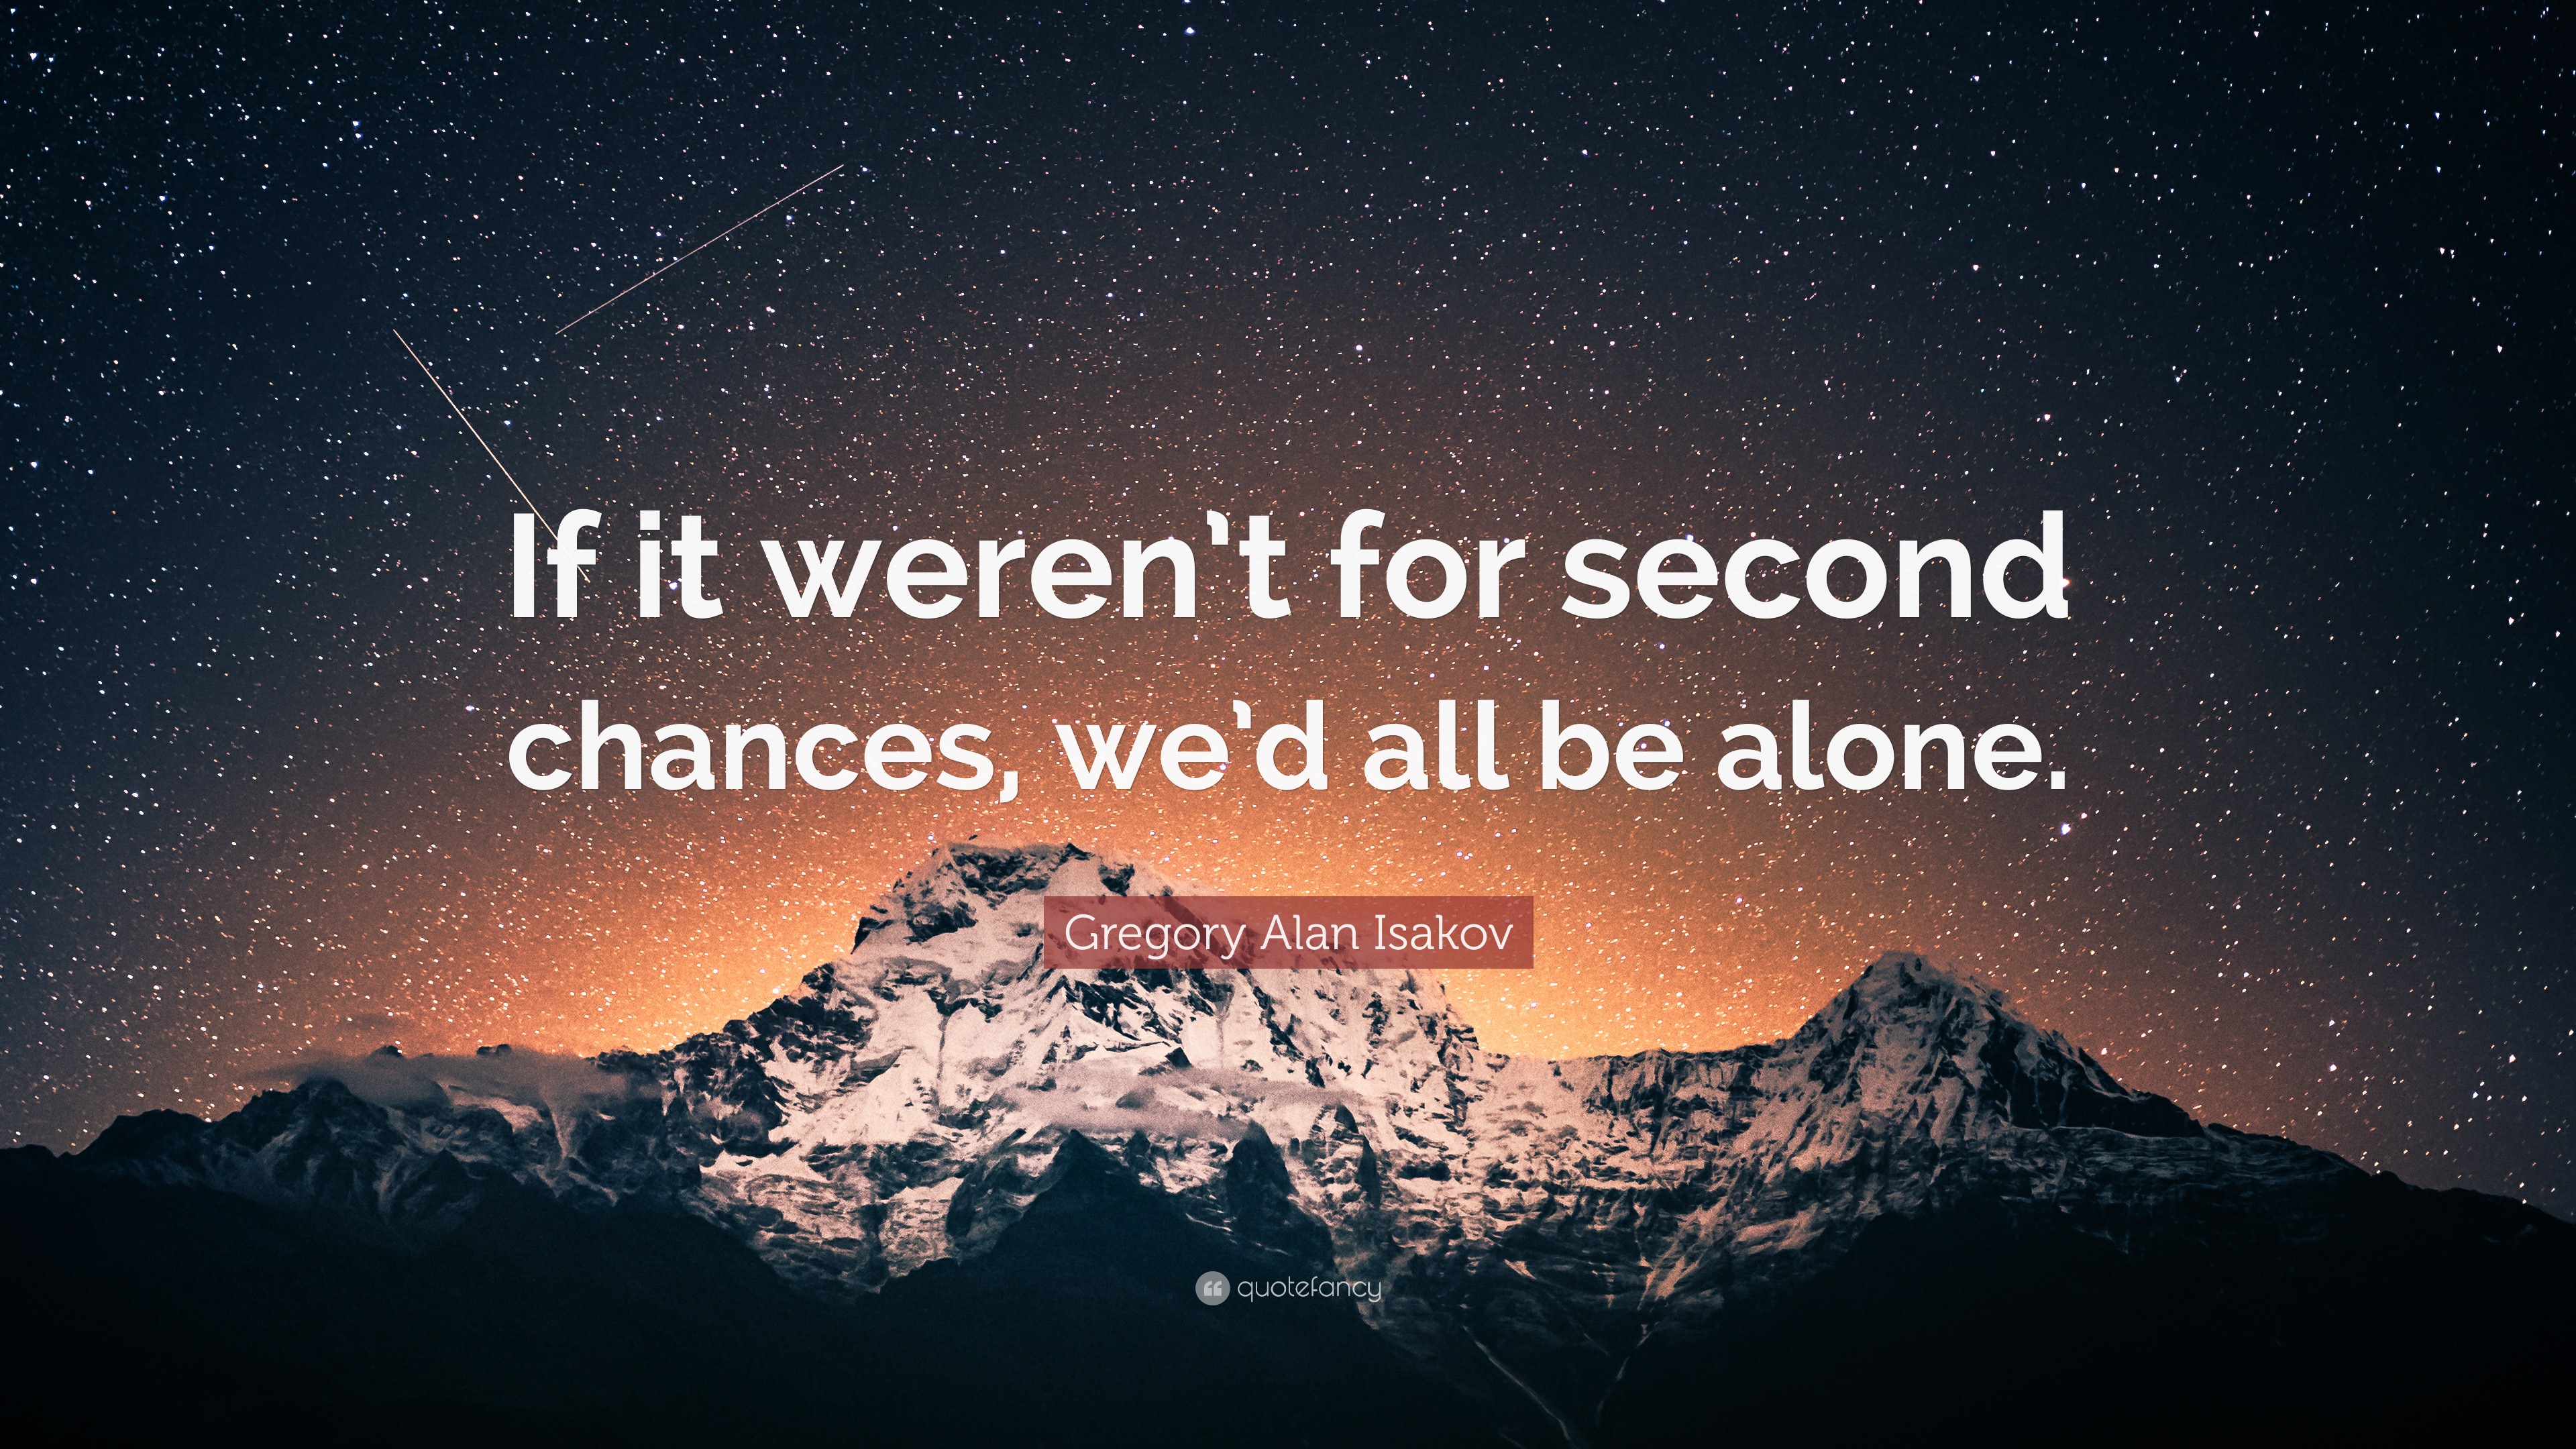 Gregory Alan Isakov Quote: “If it weren’t for second chances, we’d all ...